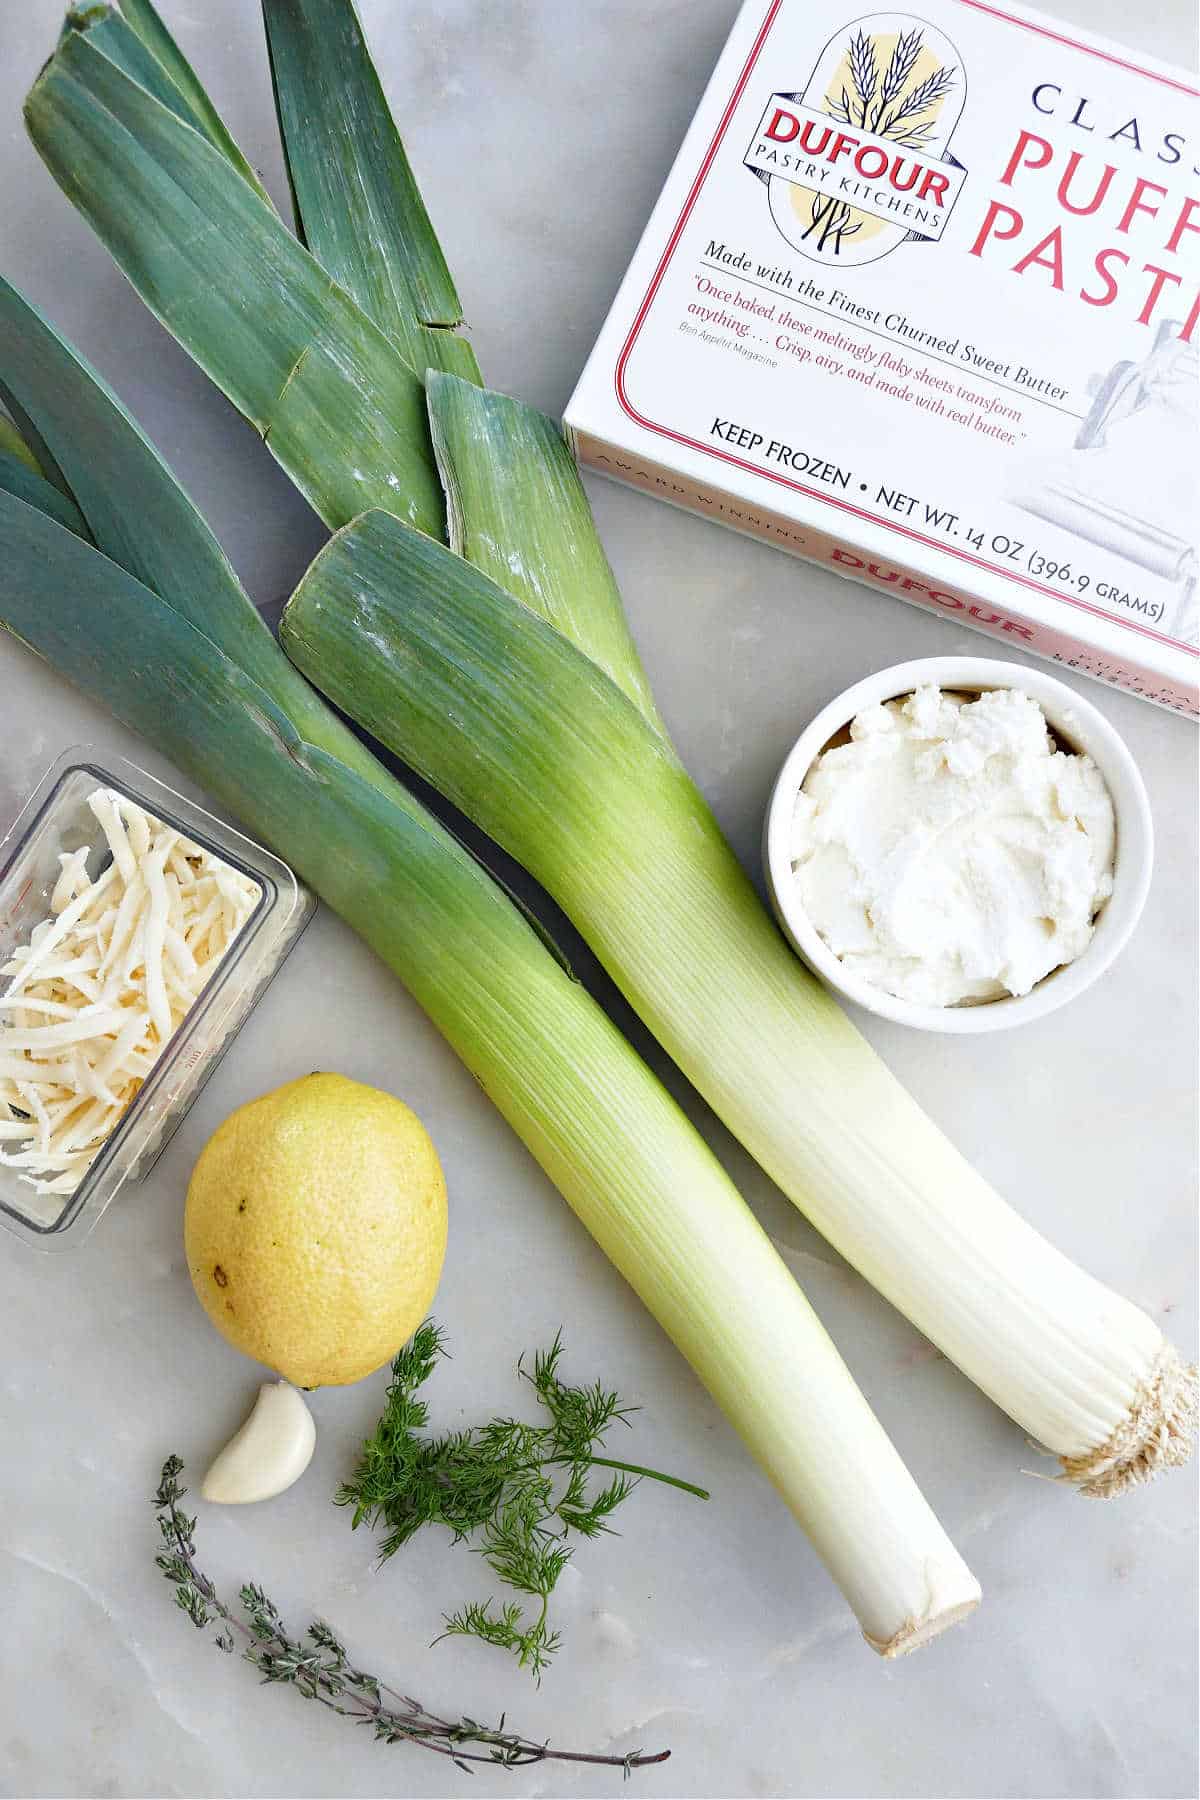 Ingredients needed to make leek puff pastry with cheese.